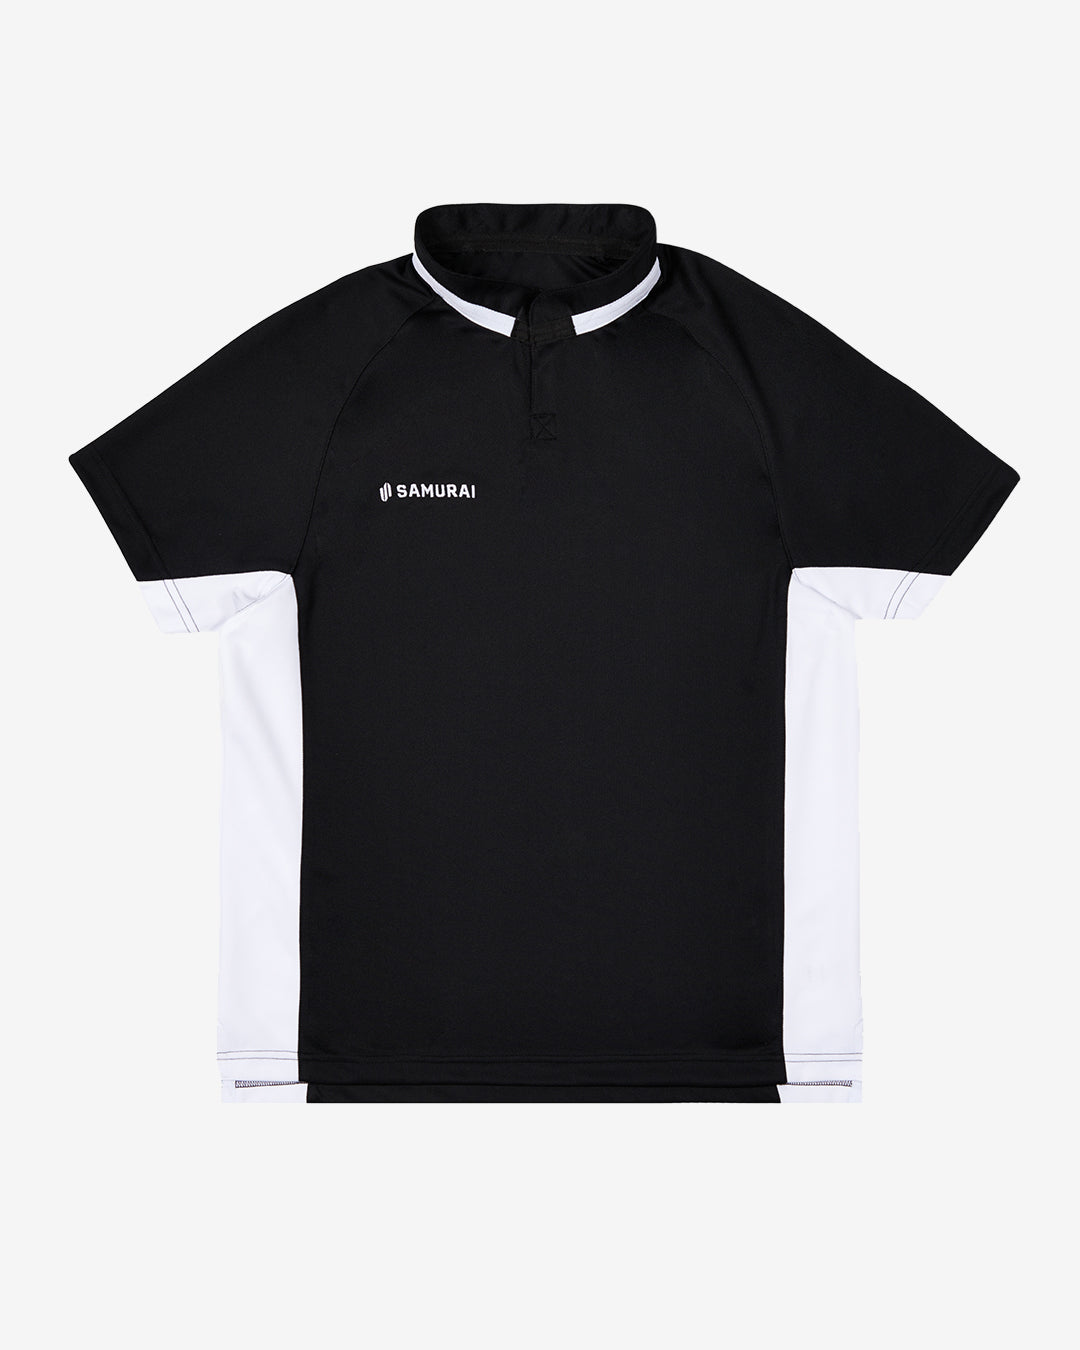 EP:0109 - Rugby Training Jersey - Black